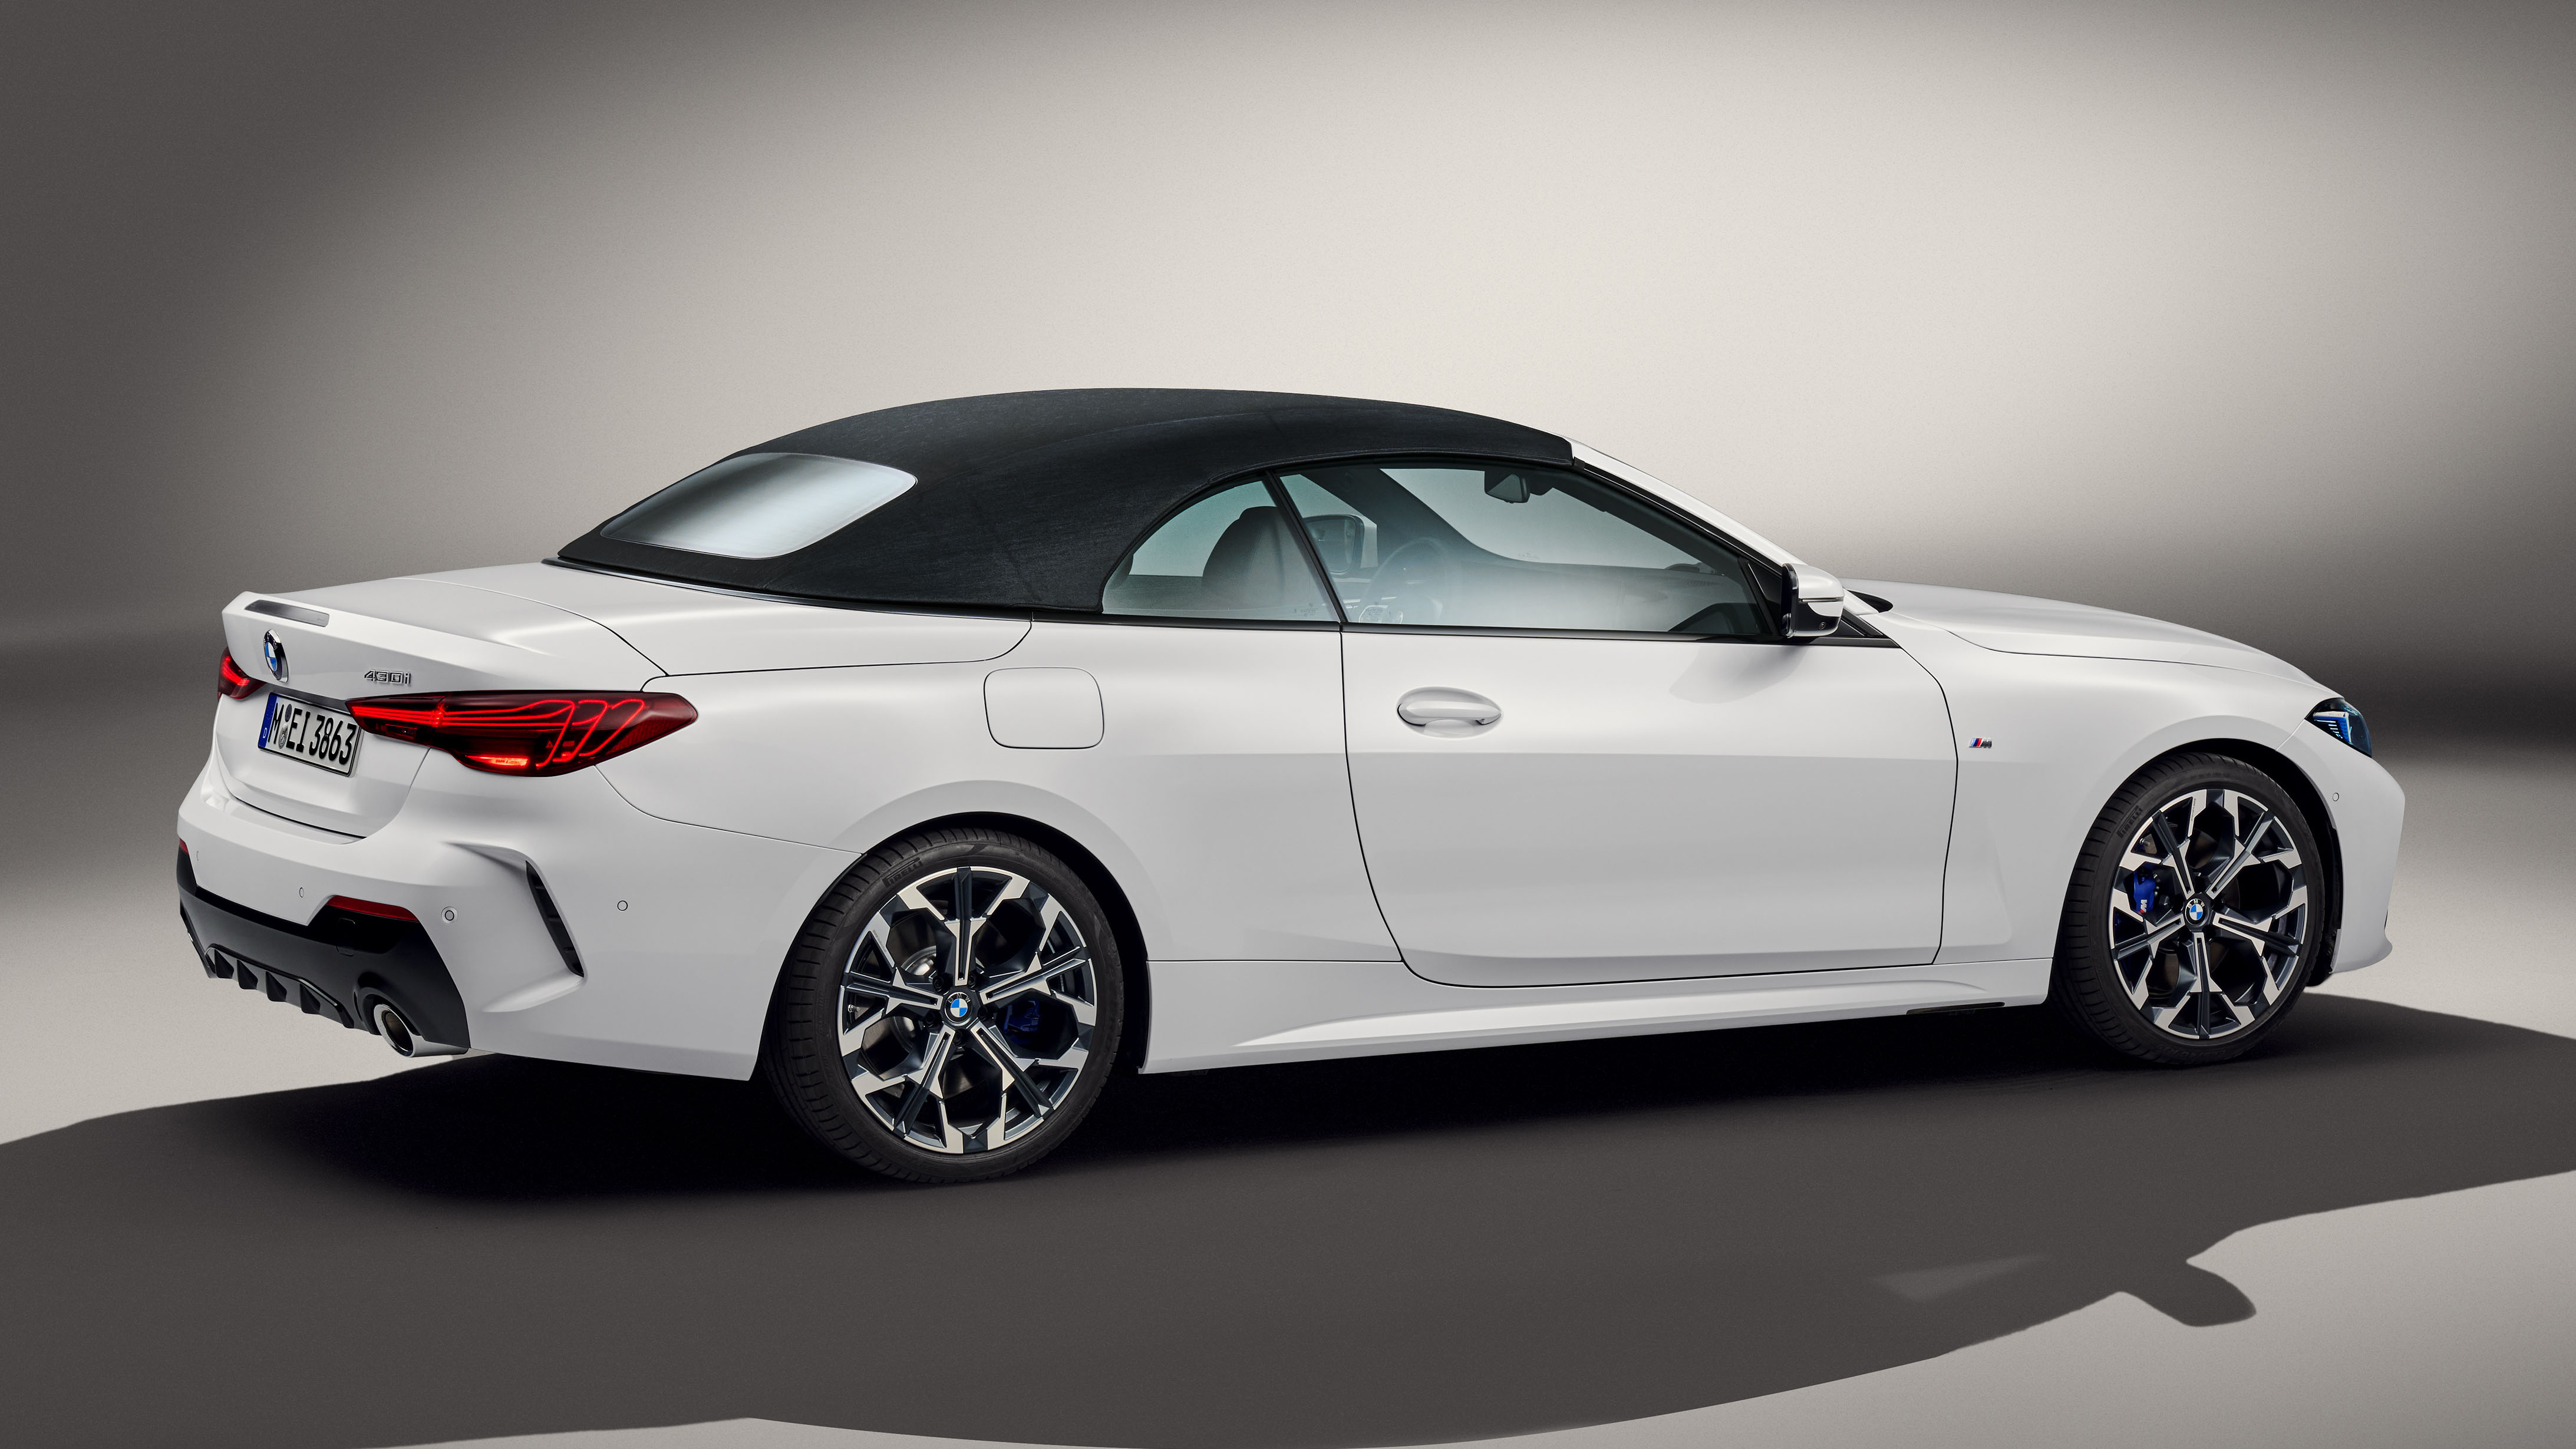 bmw reveals refreshed 4 series coupe and convertible models